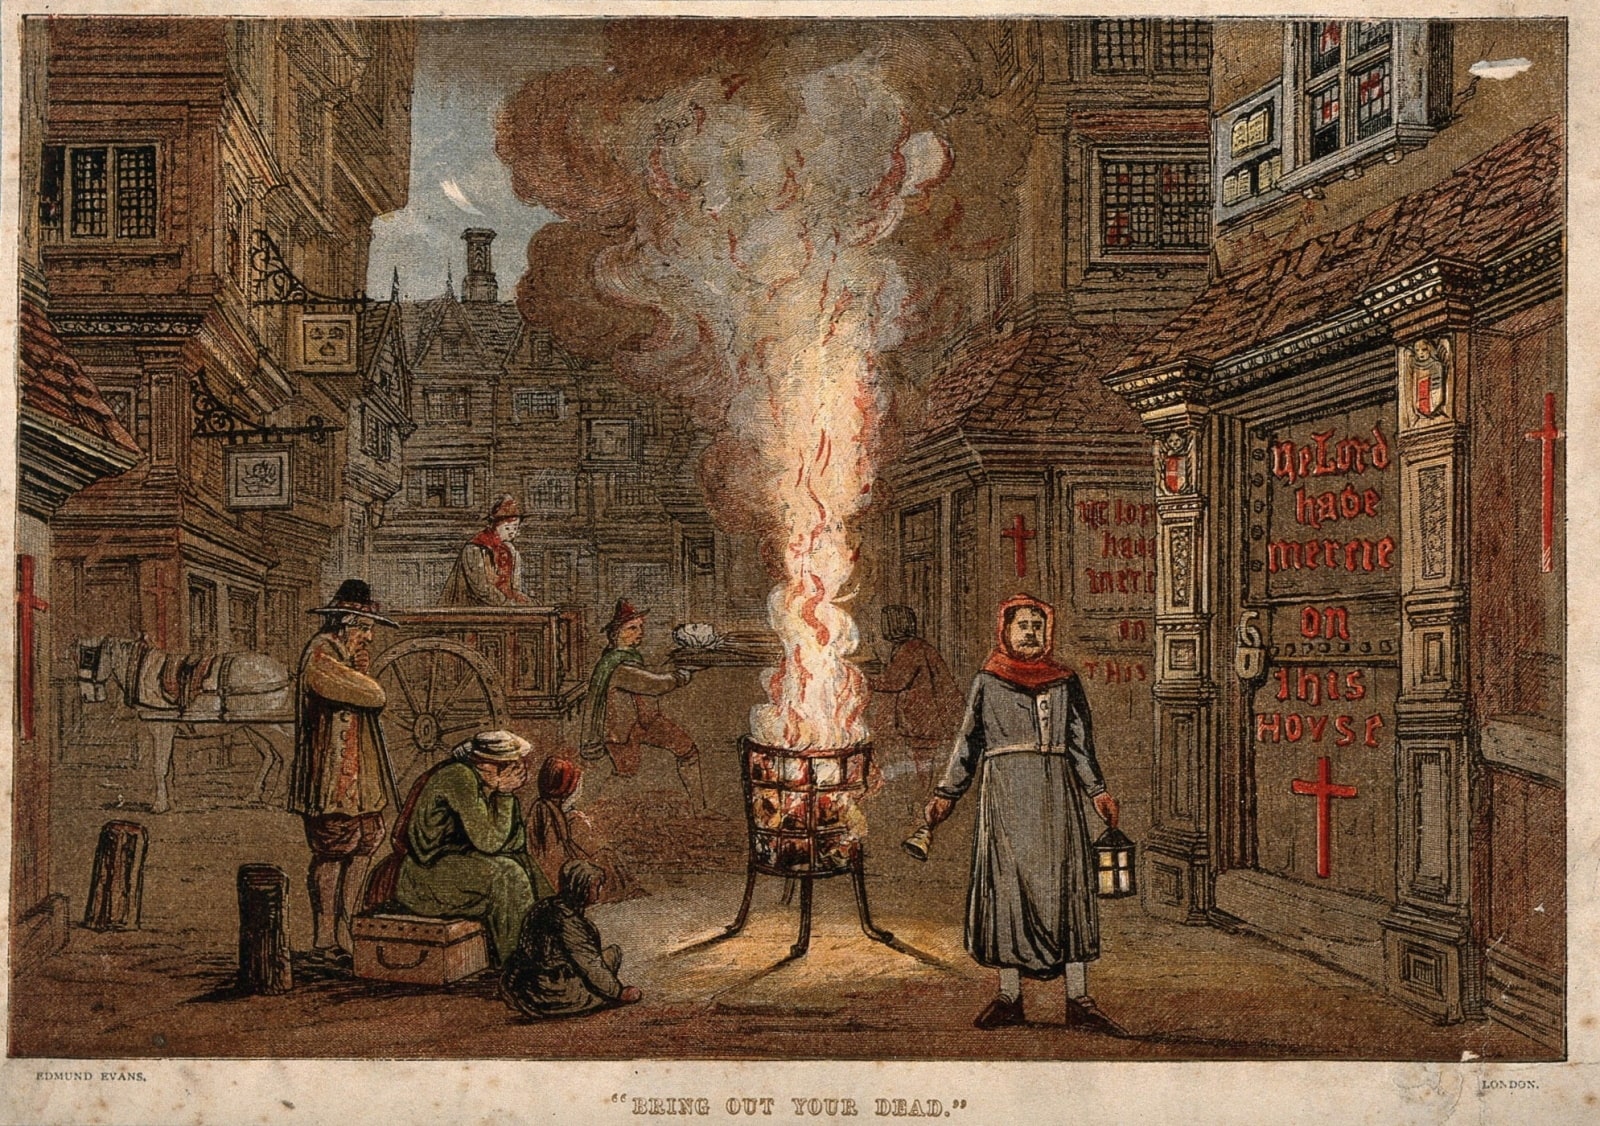 A street during the Great Plague in London, England (1664-1666) with a death cart and mourners. Colour wood engraving by E. Evans..Wellcome Collection. Public Domain Mark